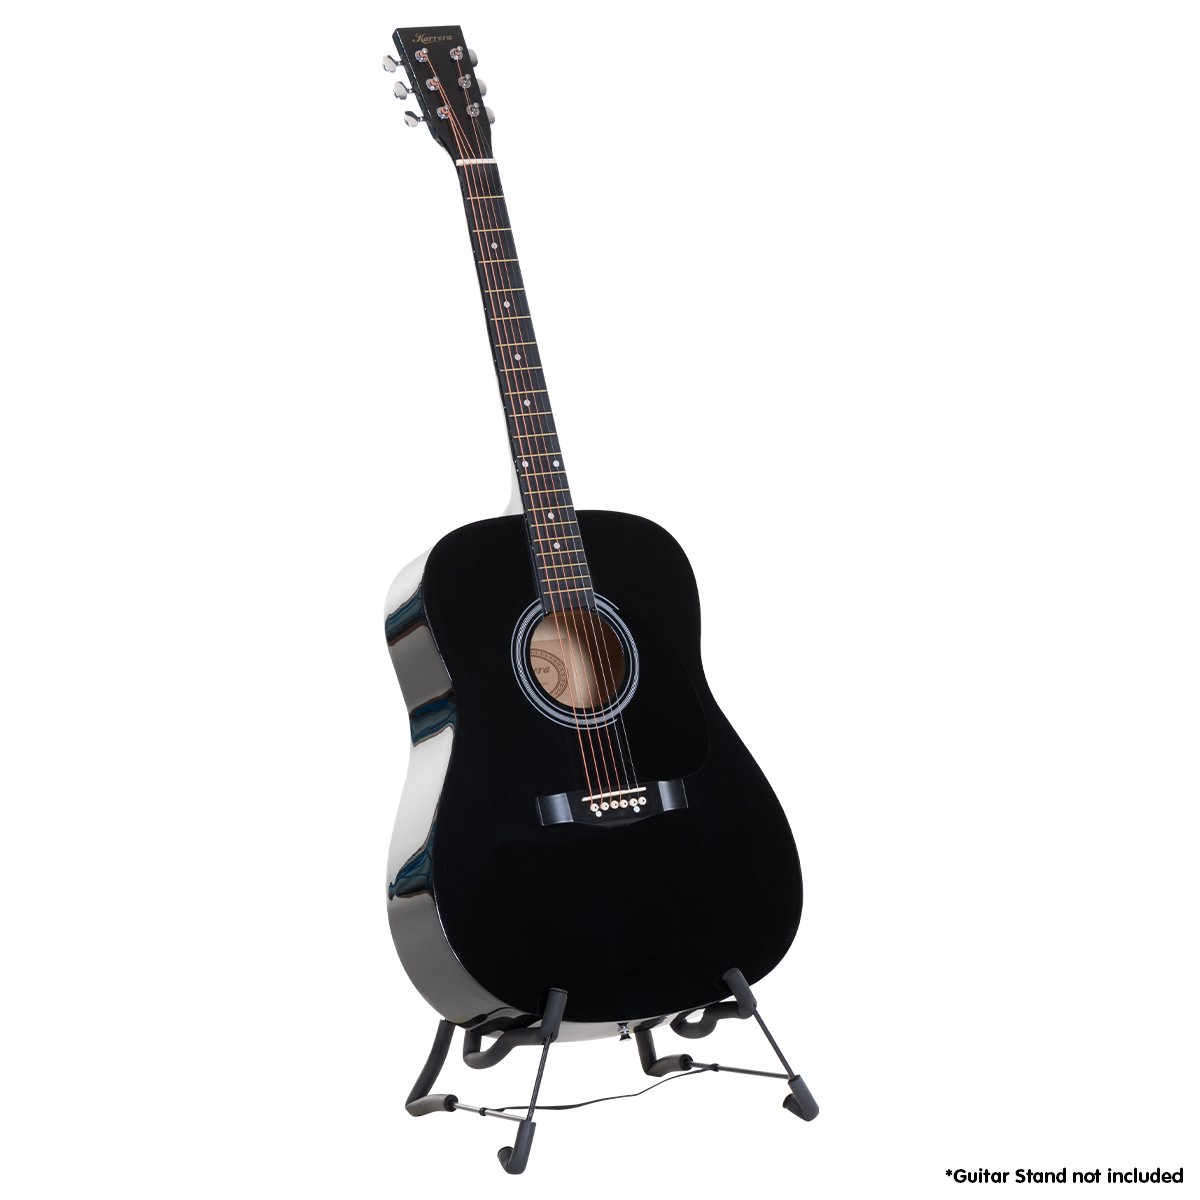 Karrera 41in Acoustic Wooden Guitar with Bag - Black - SILBERSHELL